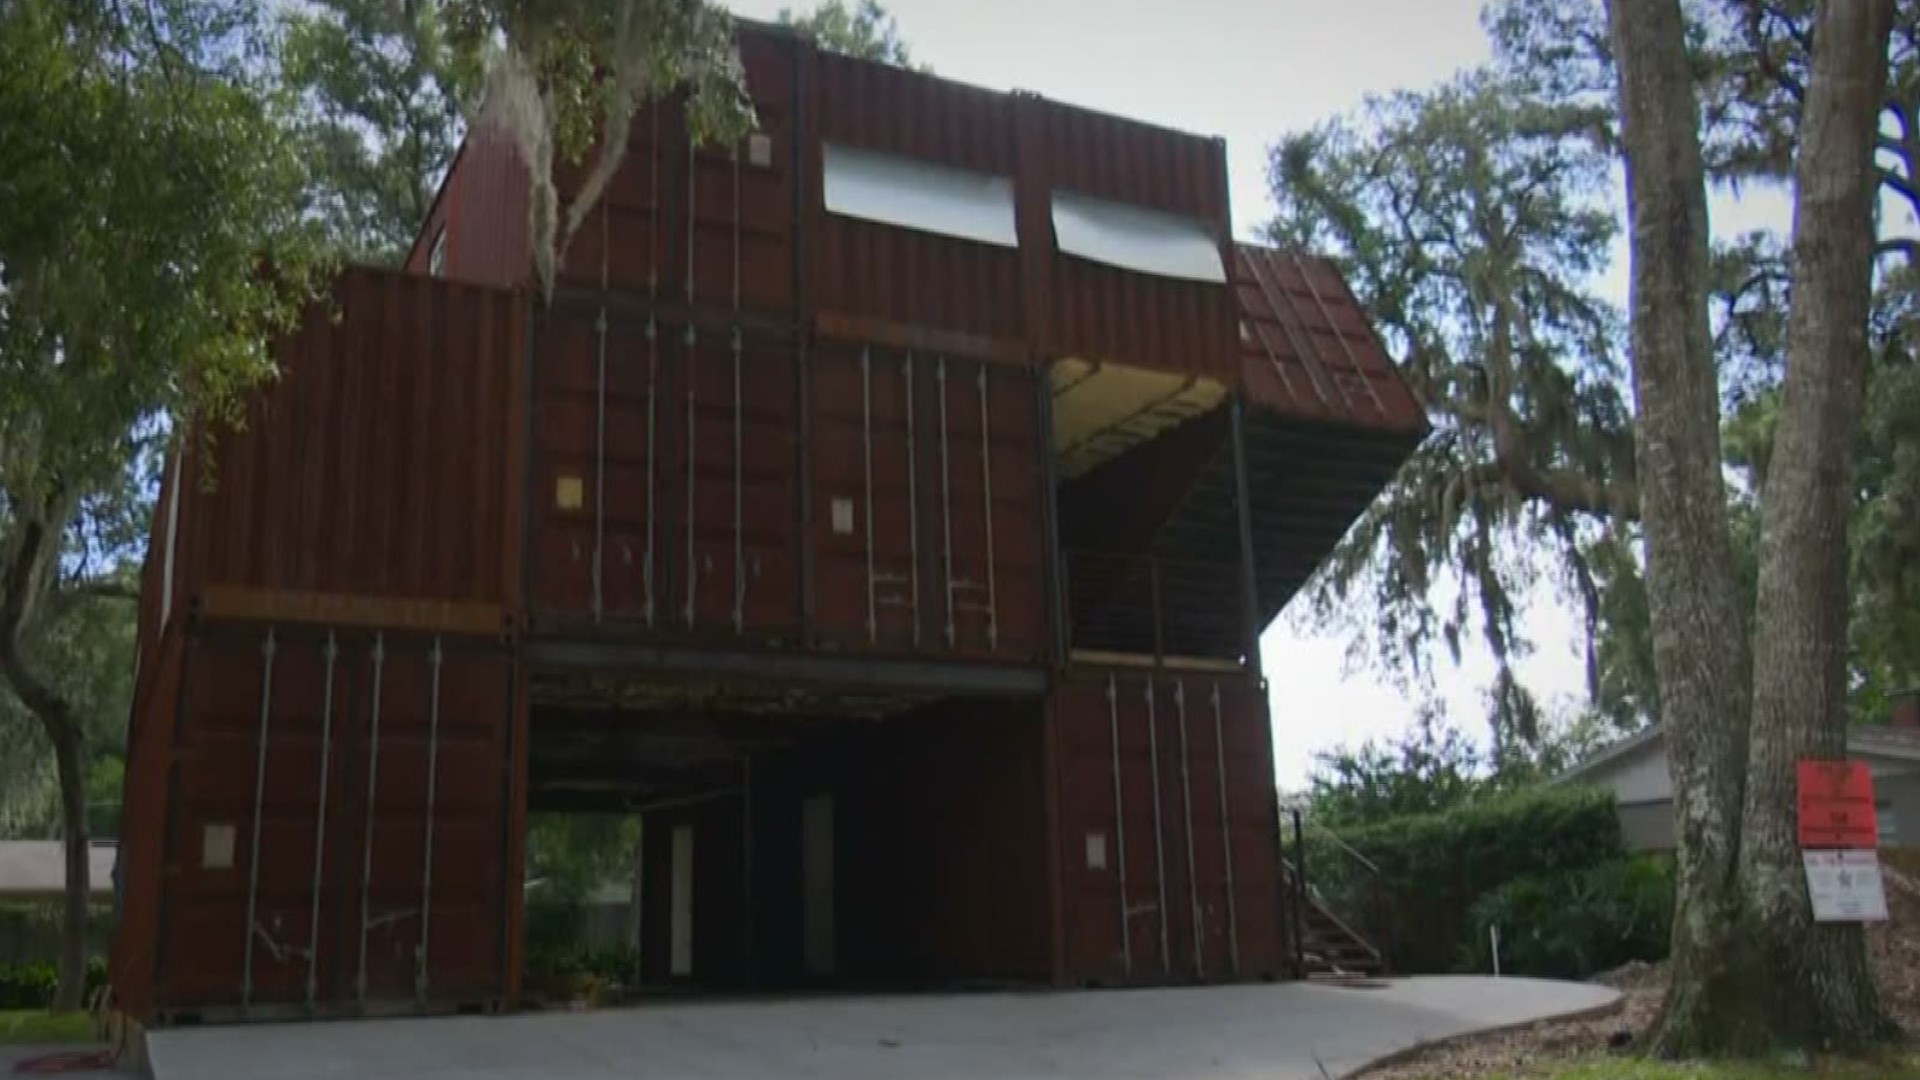 St. Augustine's famed container house was built after Hurricane Irma. But it's not finished and Owner Rob DePiazza is worried about what will happen with Dorian.